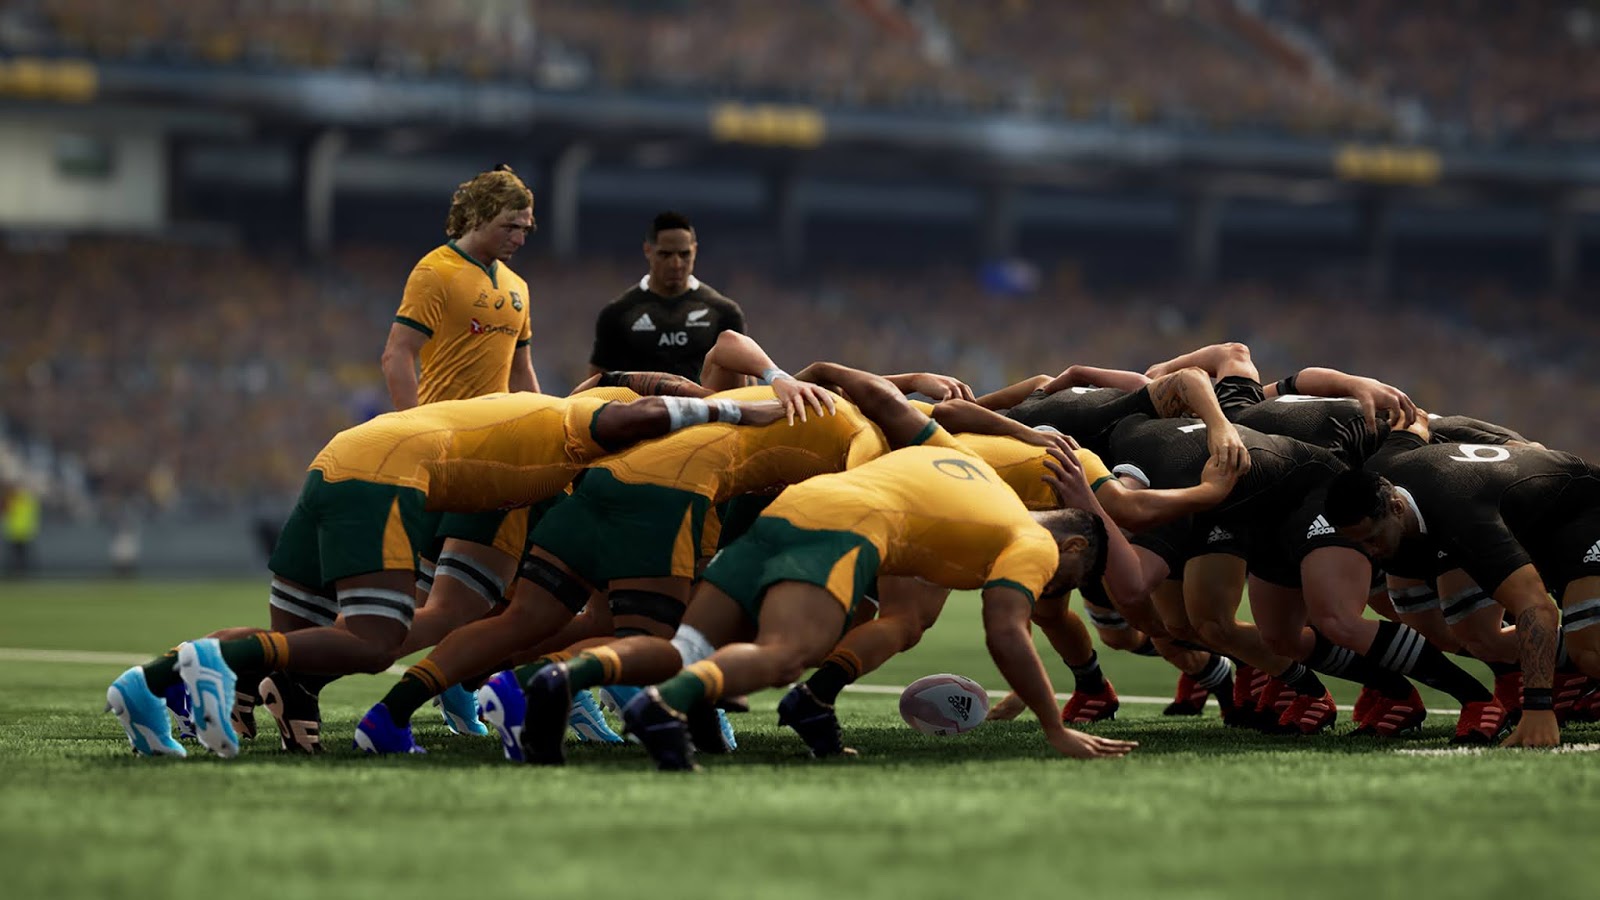 rugby challenge 3 world cup mode